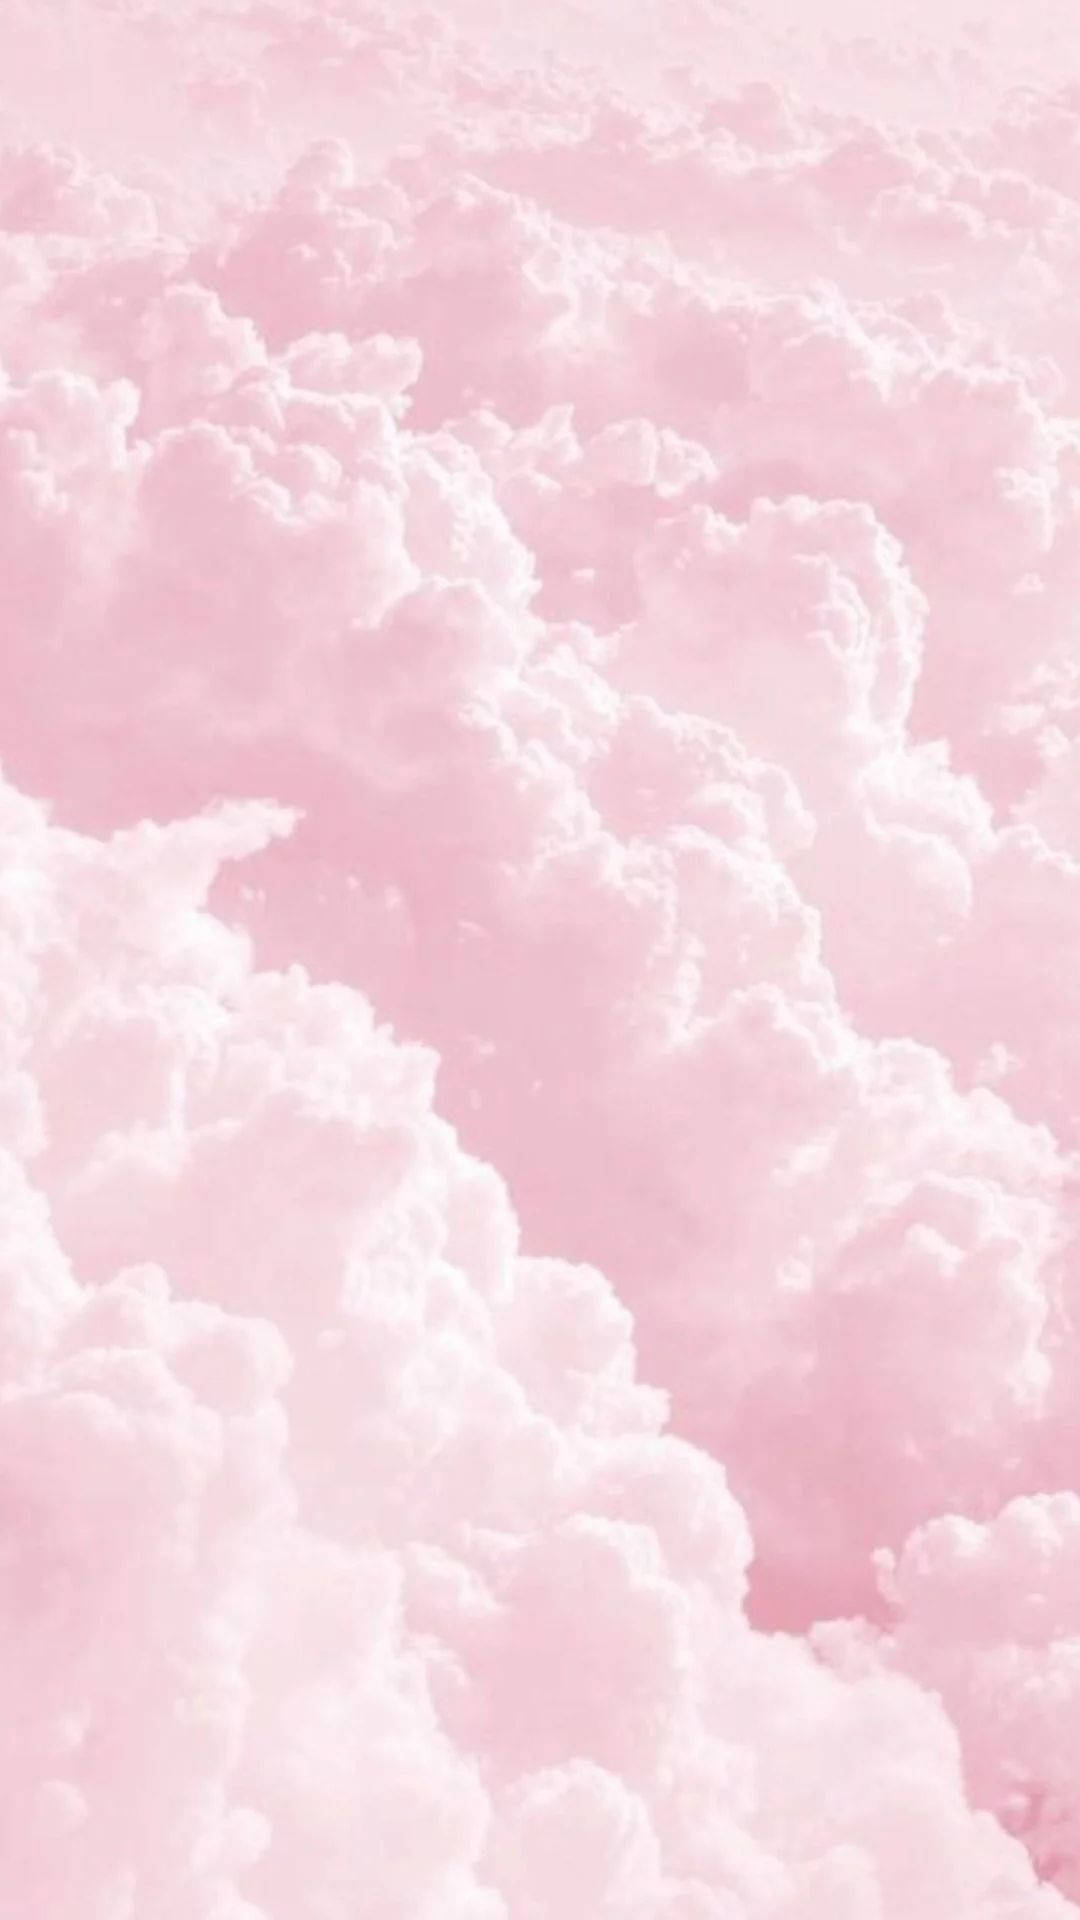 Aesthetic Pink Fluffy Clouds Background